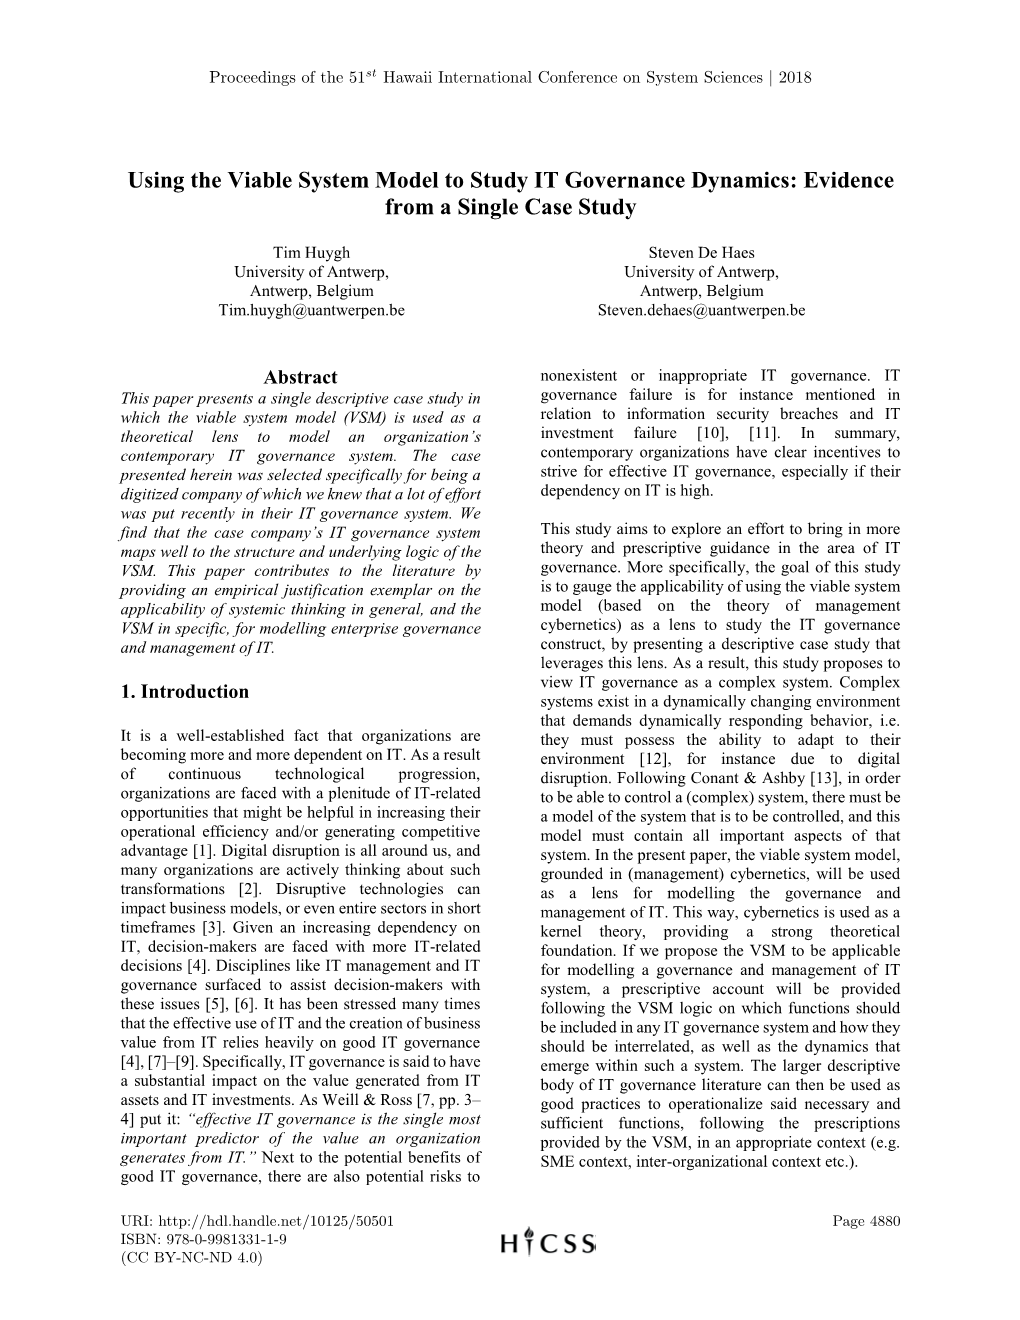 Using the Viable System Model to Study IT Governance Dynamics: Evidence from a Single Case Study